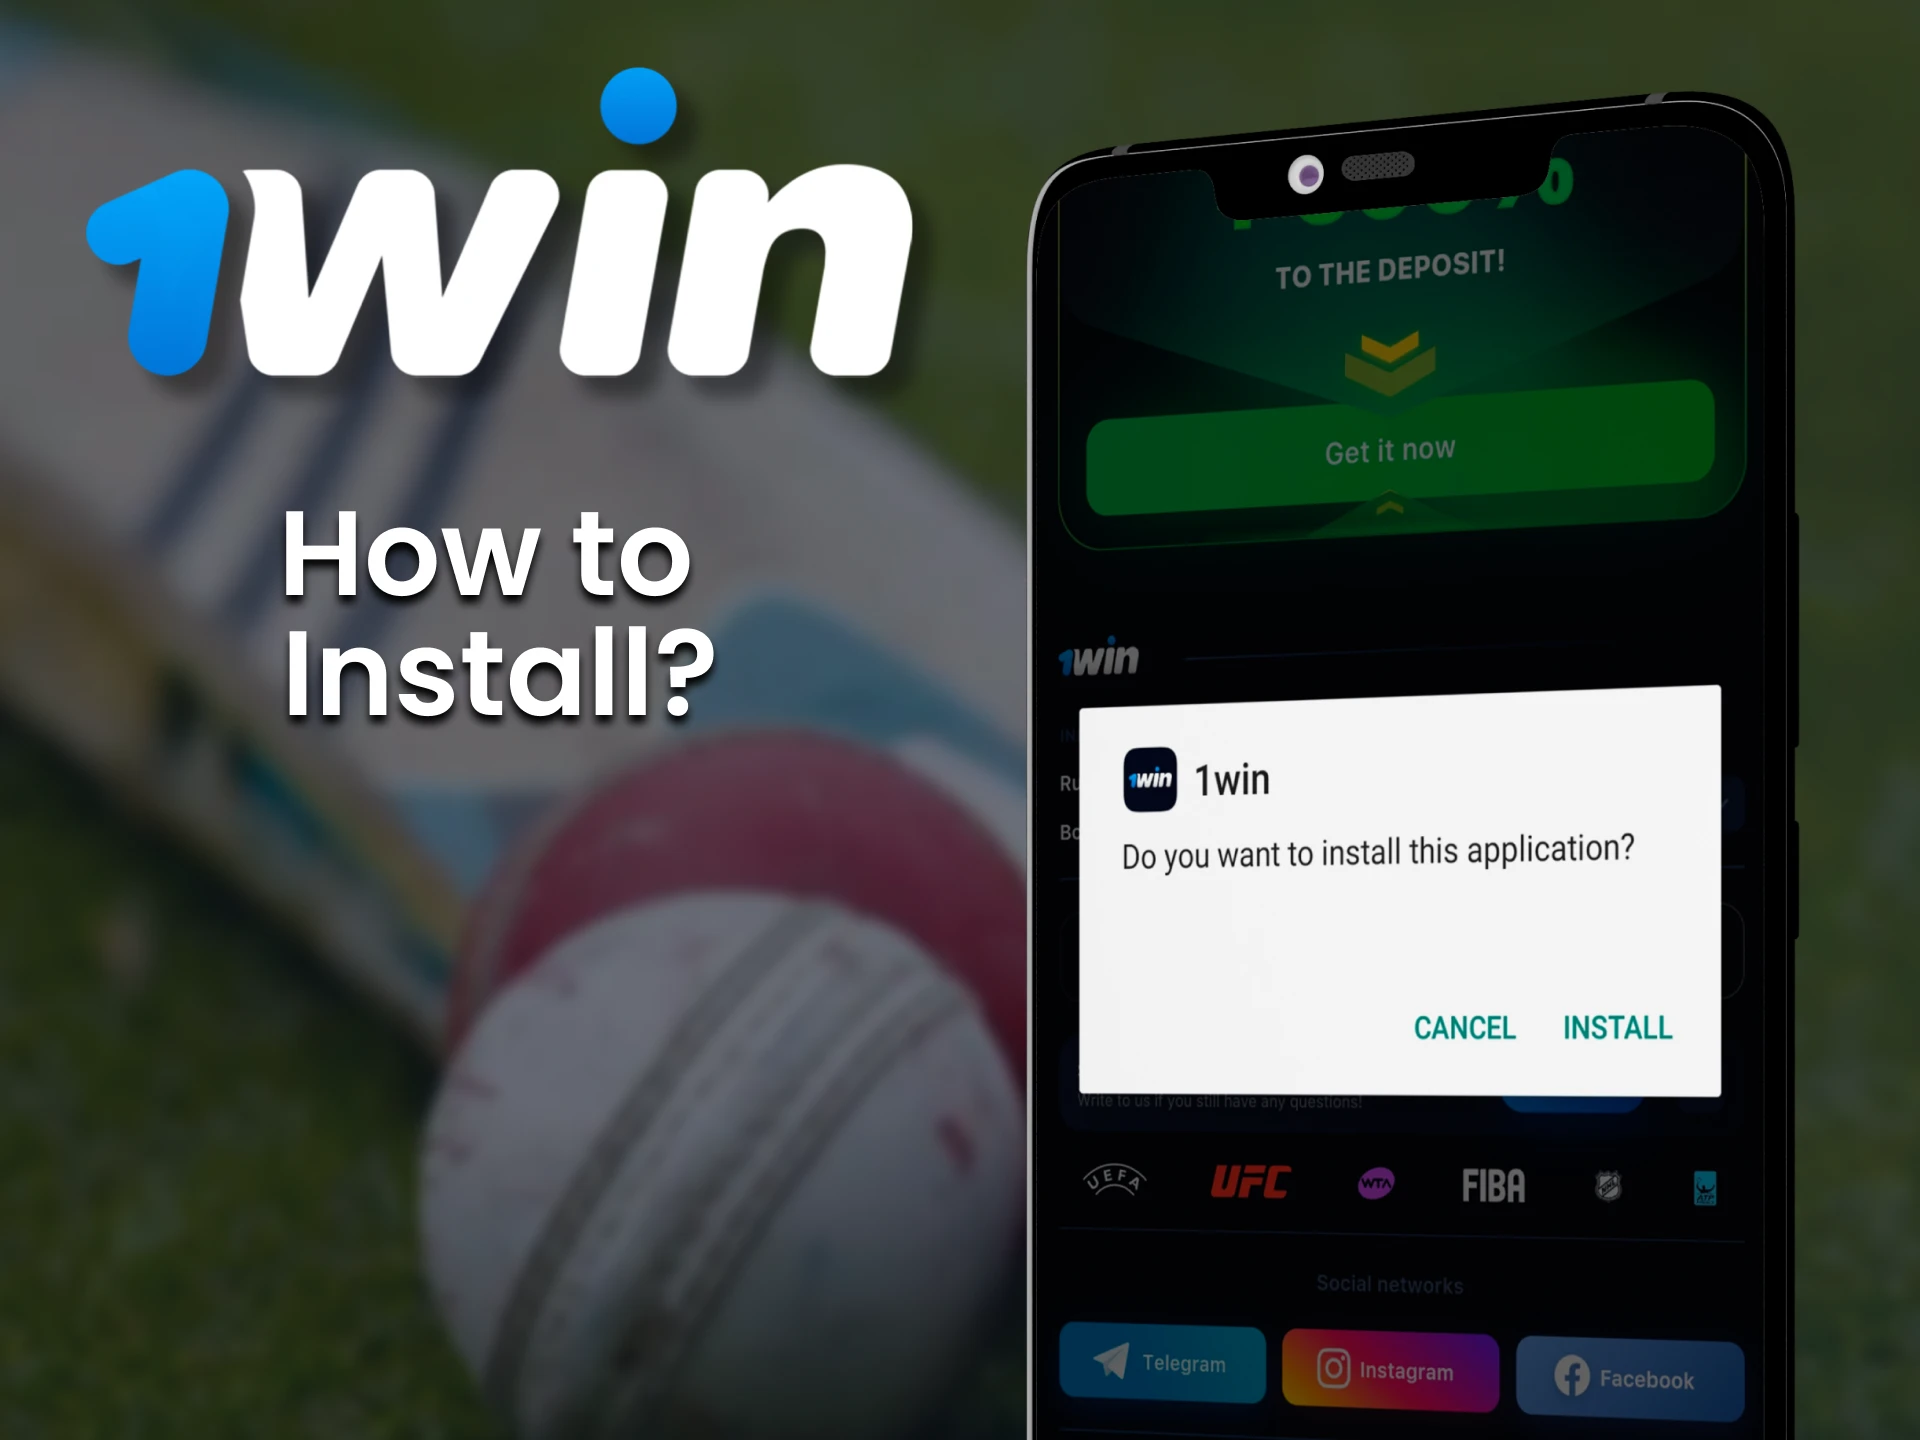 Install the 1win app following the instructions below.